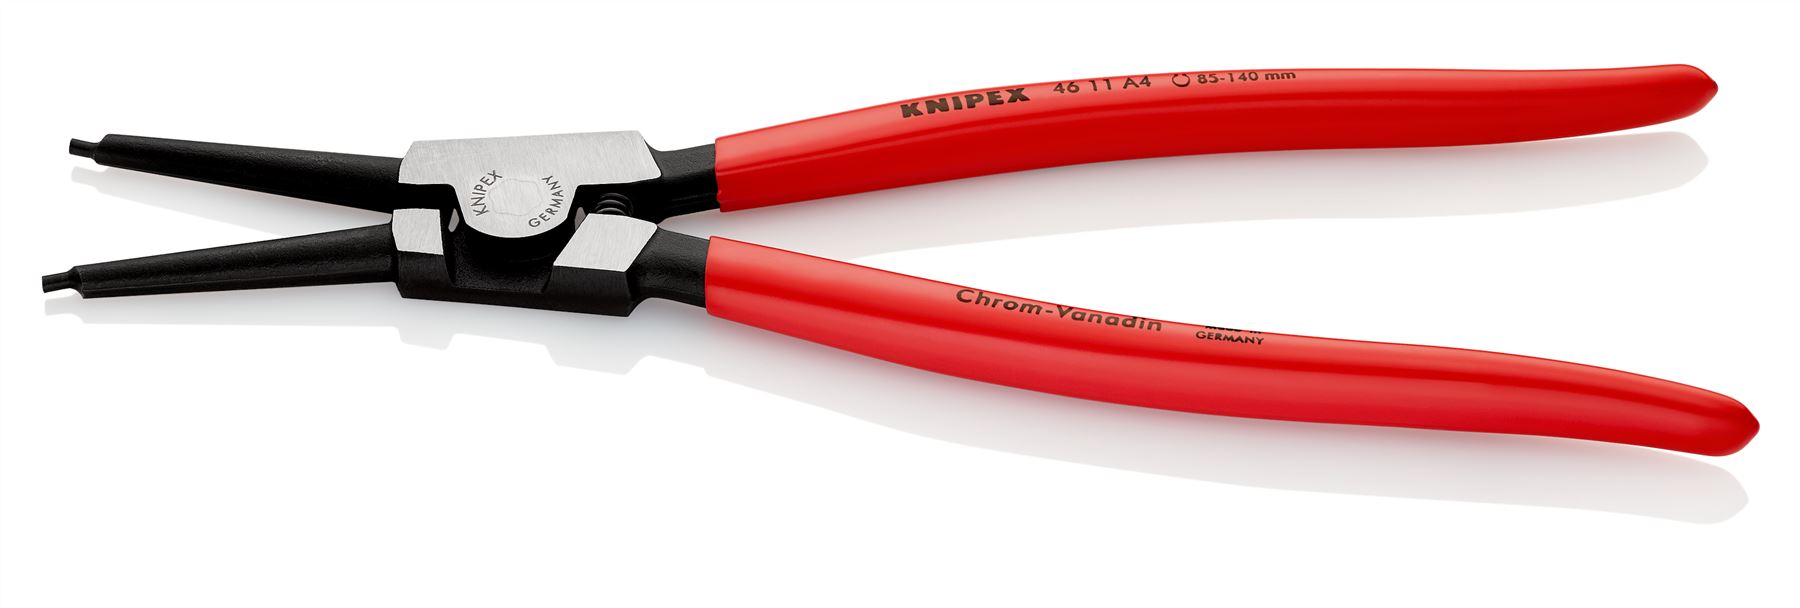 KNIPEX Circlip Pliers for External Circlips on Shafts 320mm 3.2mm Diameter Tips 46 11 A4